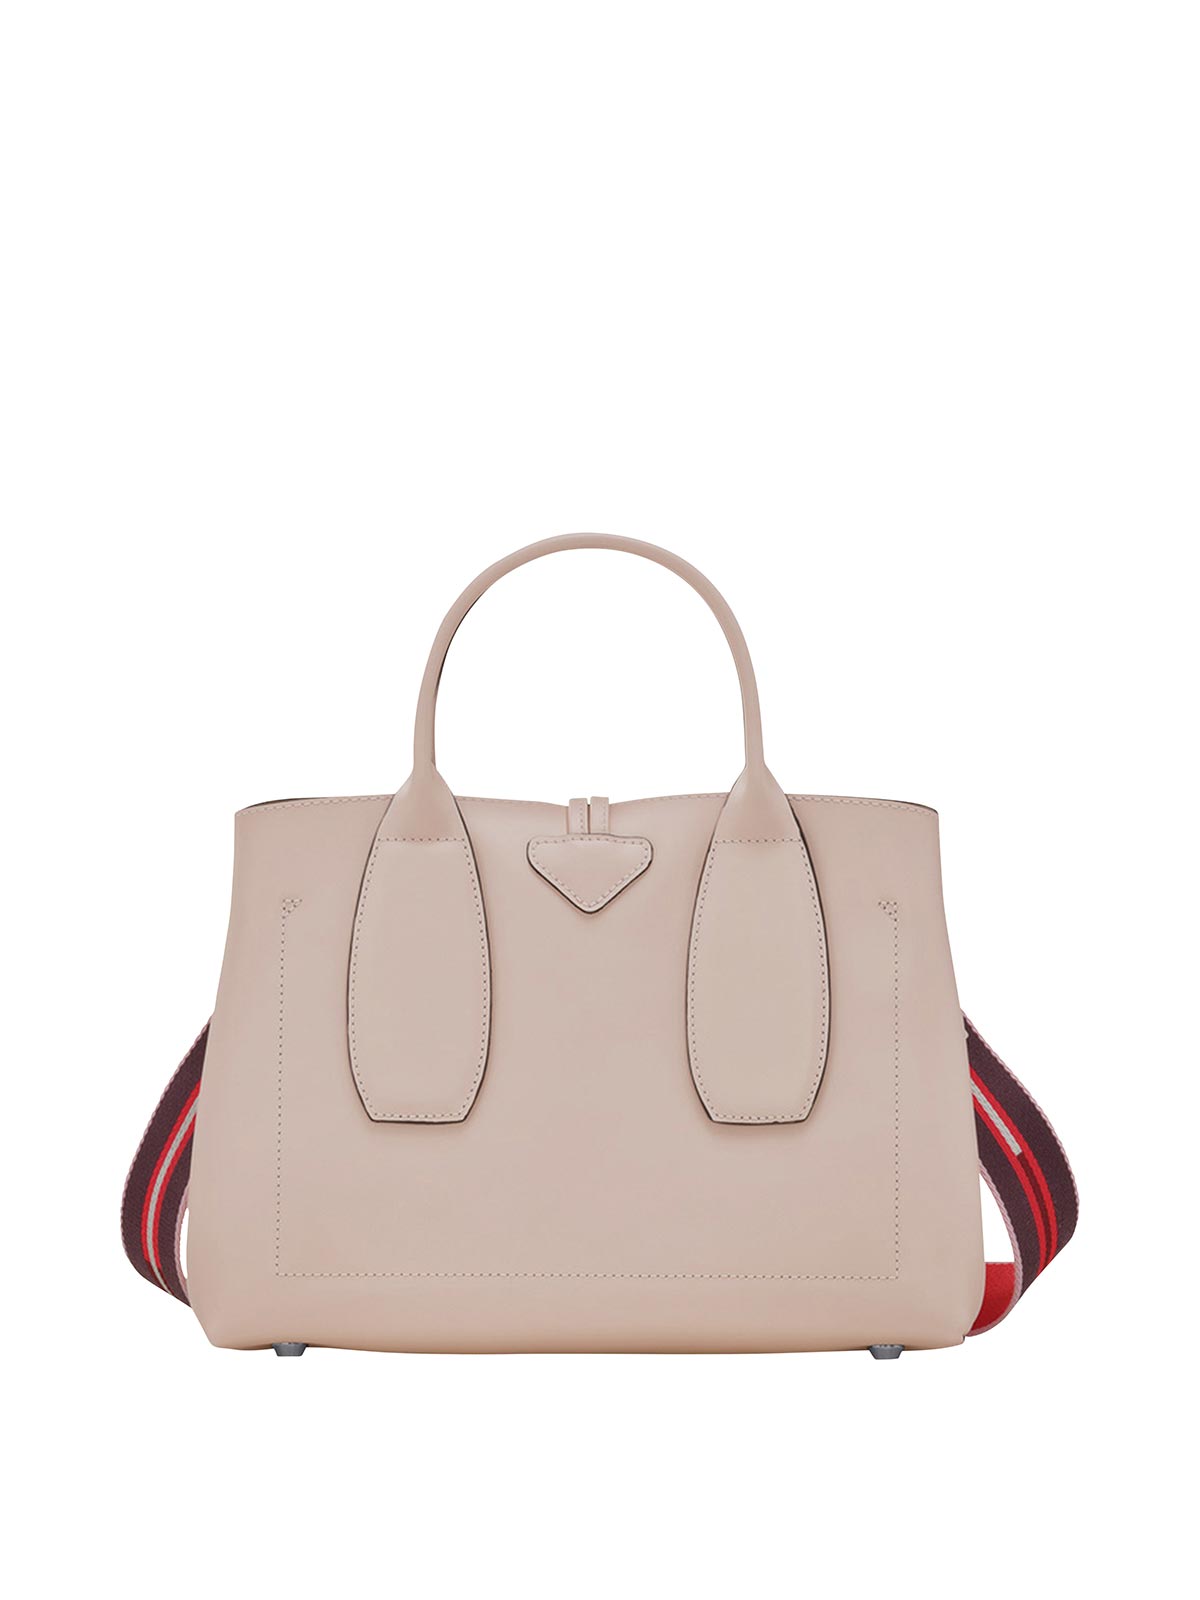 Longchamp Shopping Bag In Pink With Top Handles In Light Pink